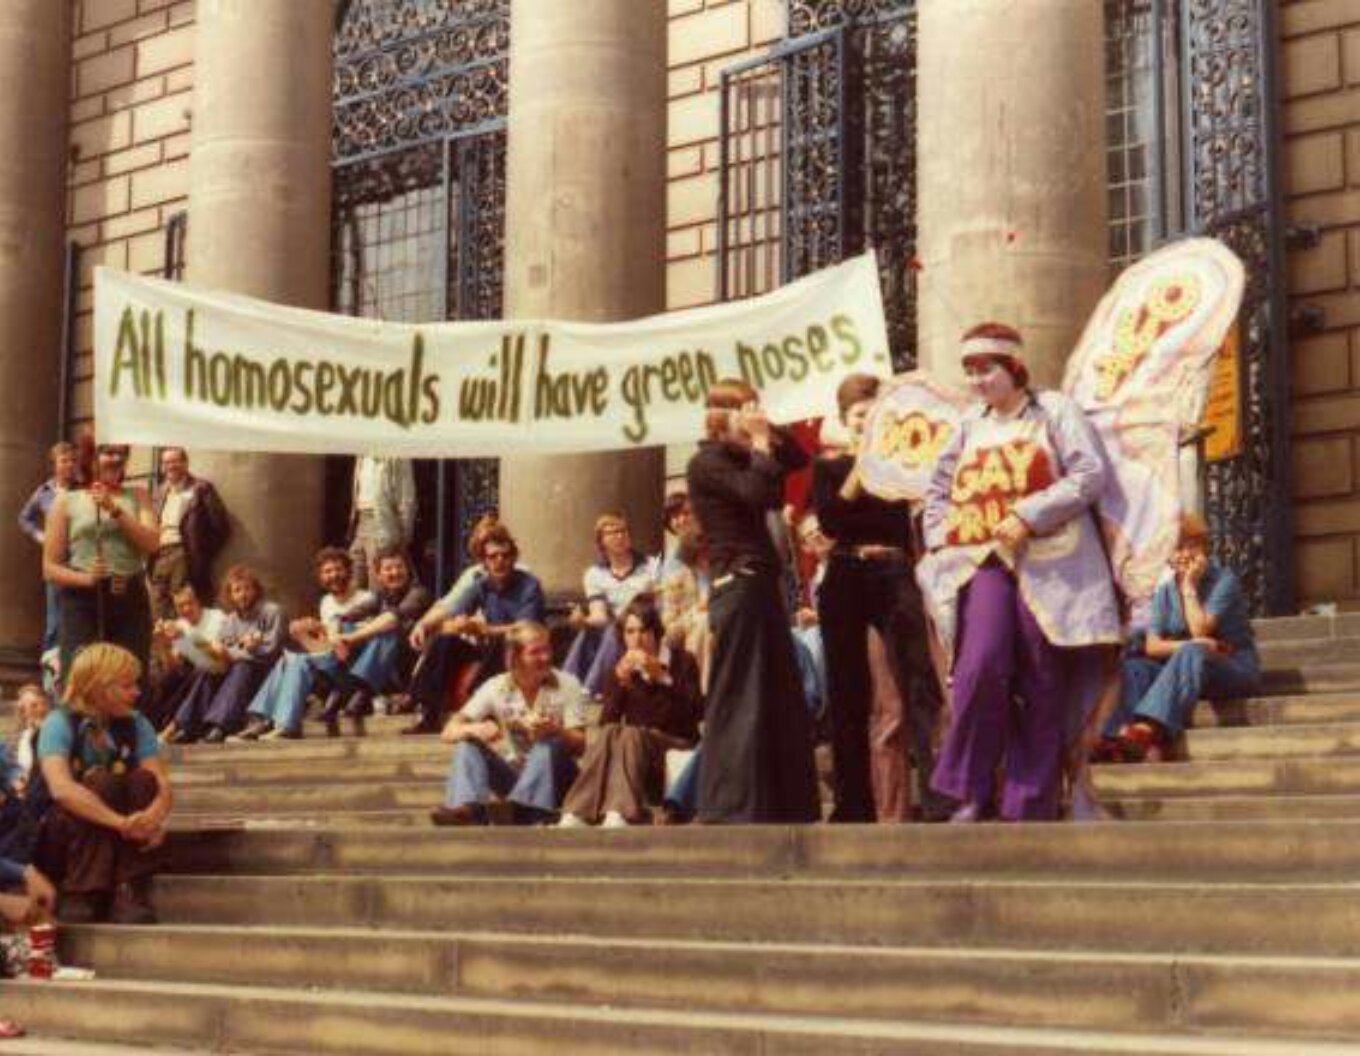 A group of people sitting and standing on the steps of City Hall One person is wearing fairy wings and a handmade t shirt that reads Gay Pride Some people hold a banner that reads All homosexuals will have green noses